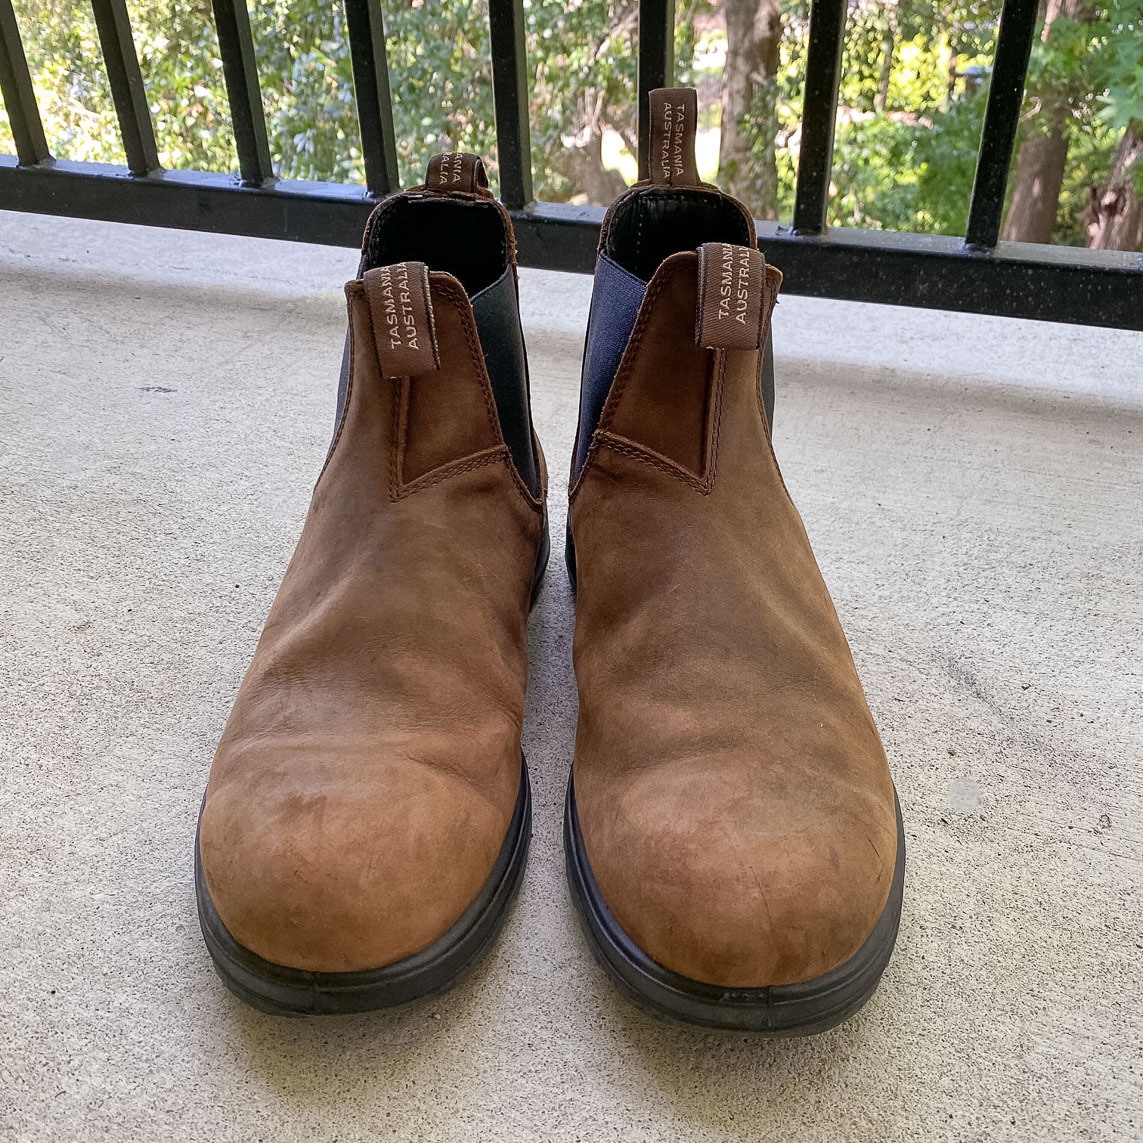 Blundstone classic 550s front view